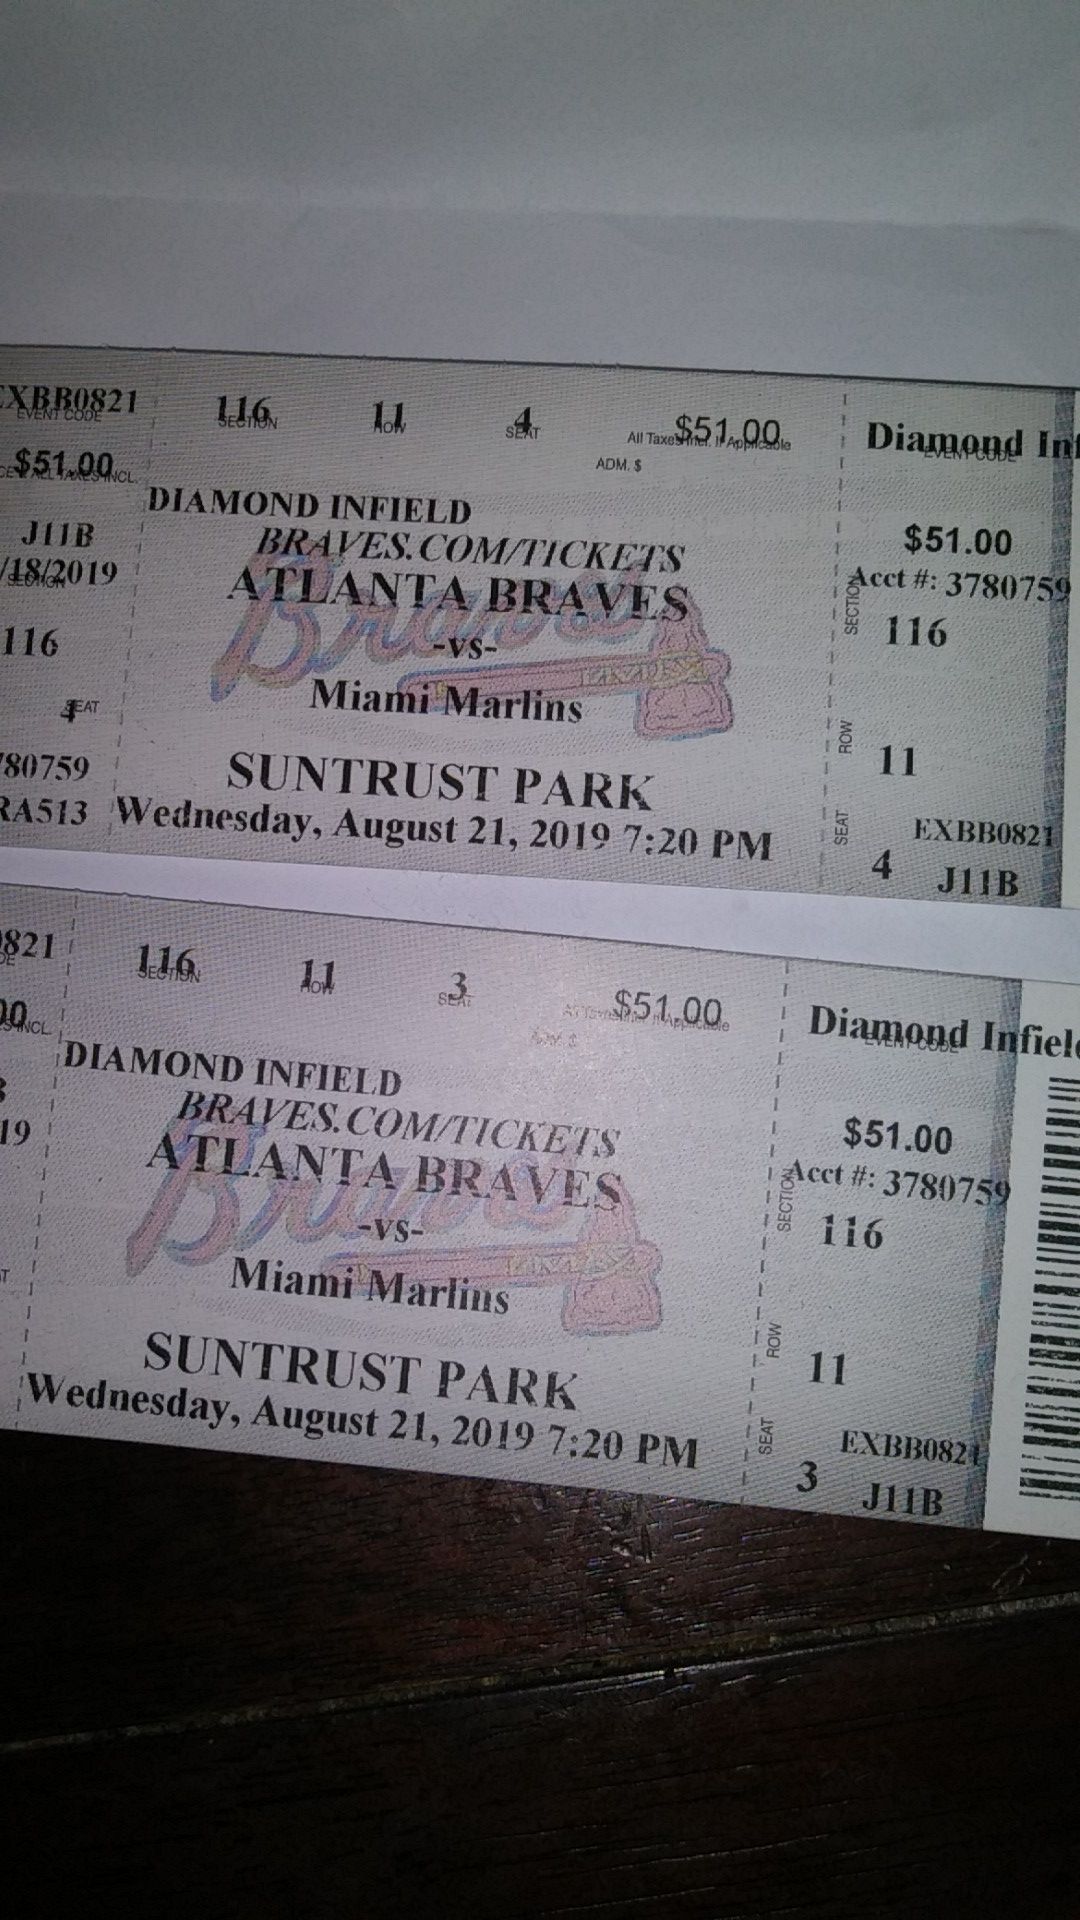 2 3rd base tickets for the Atlanta braves Game seat#3,4 row11 section116. Only for todays game.